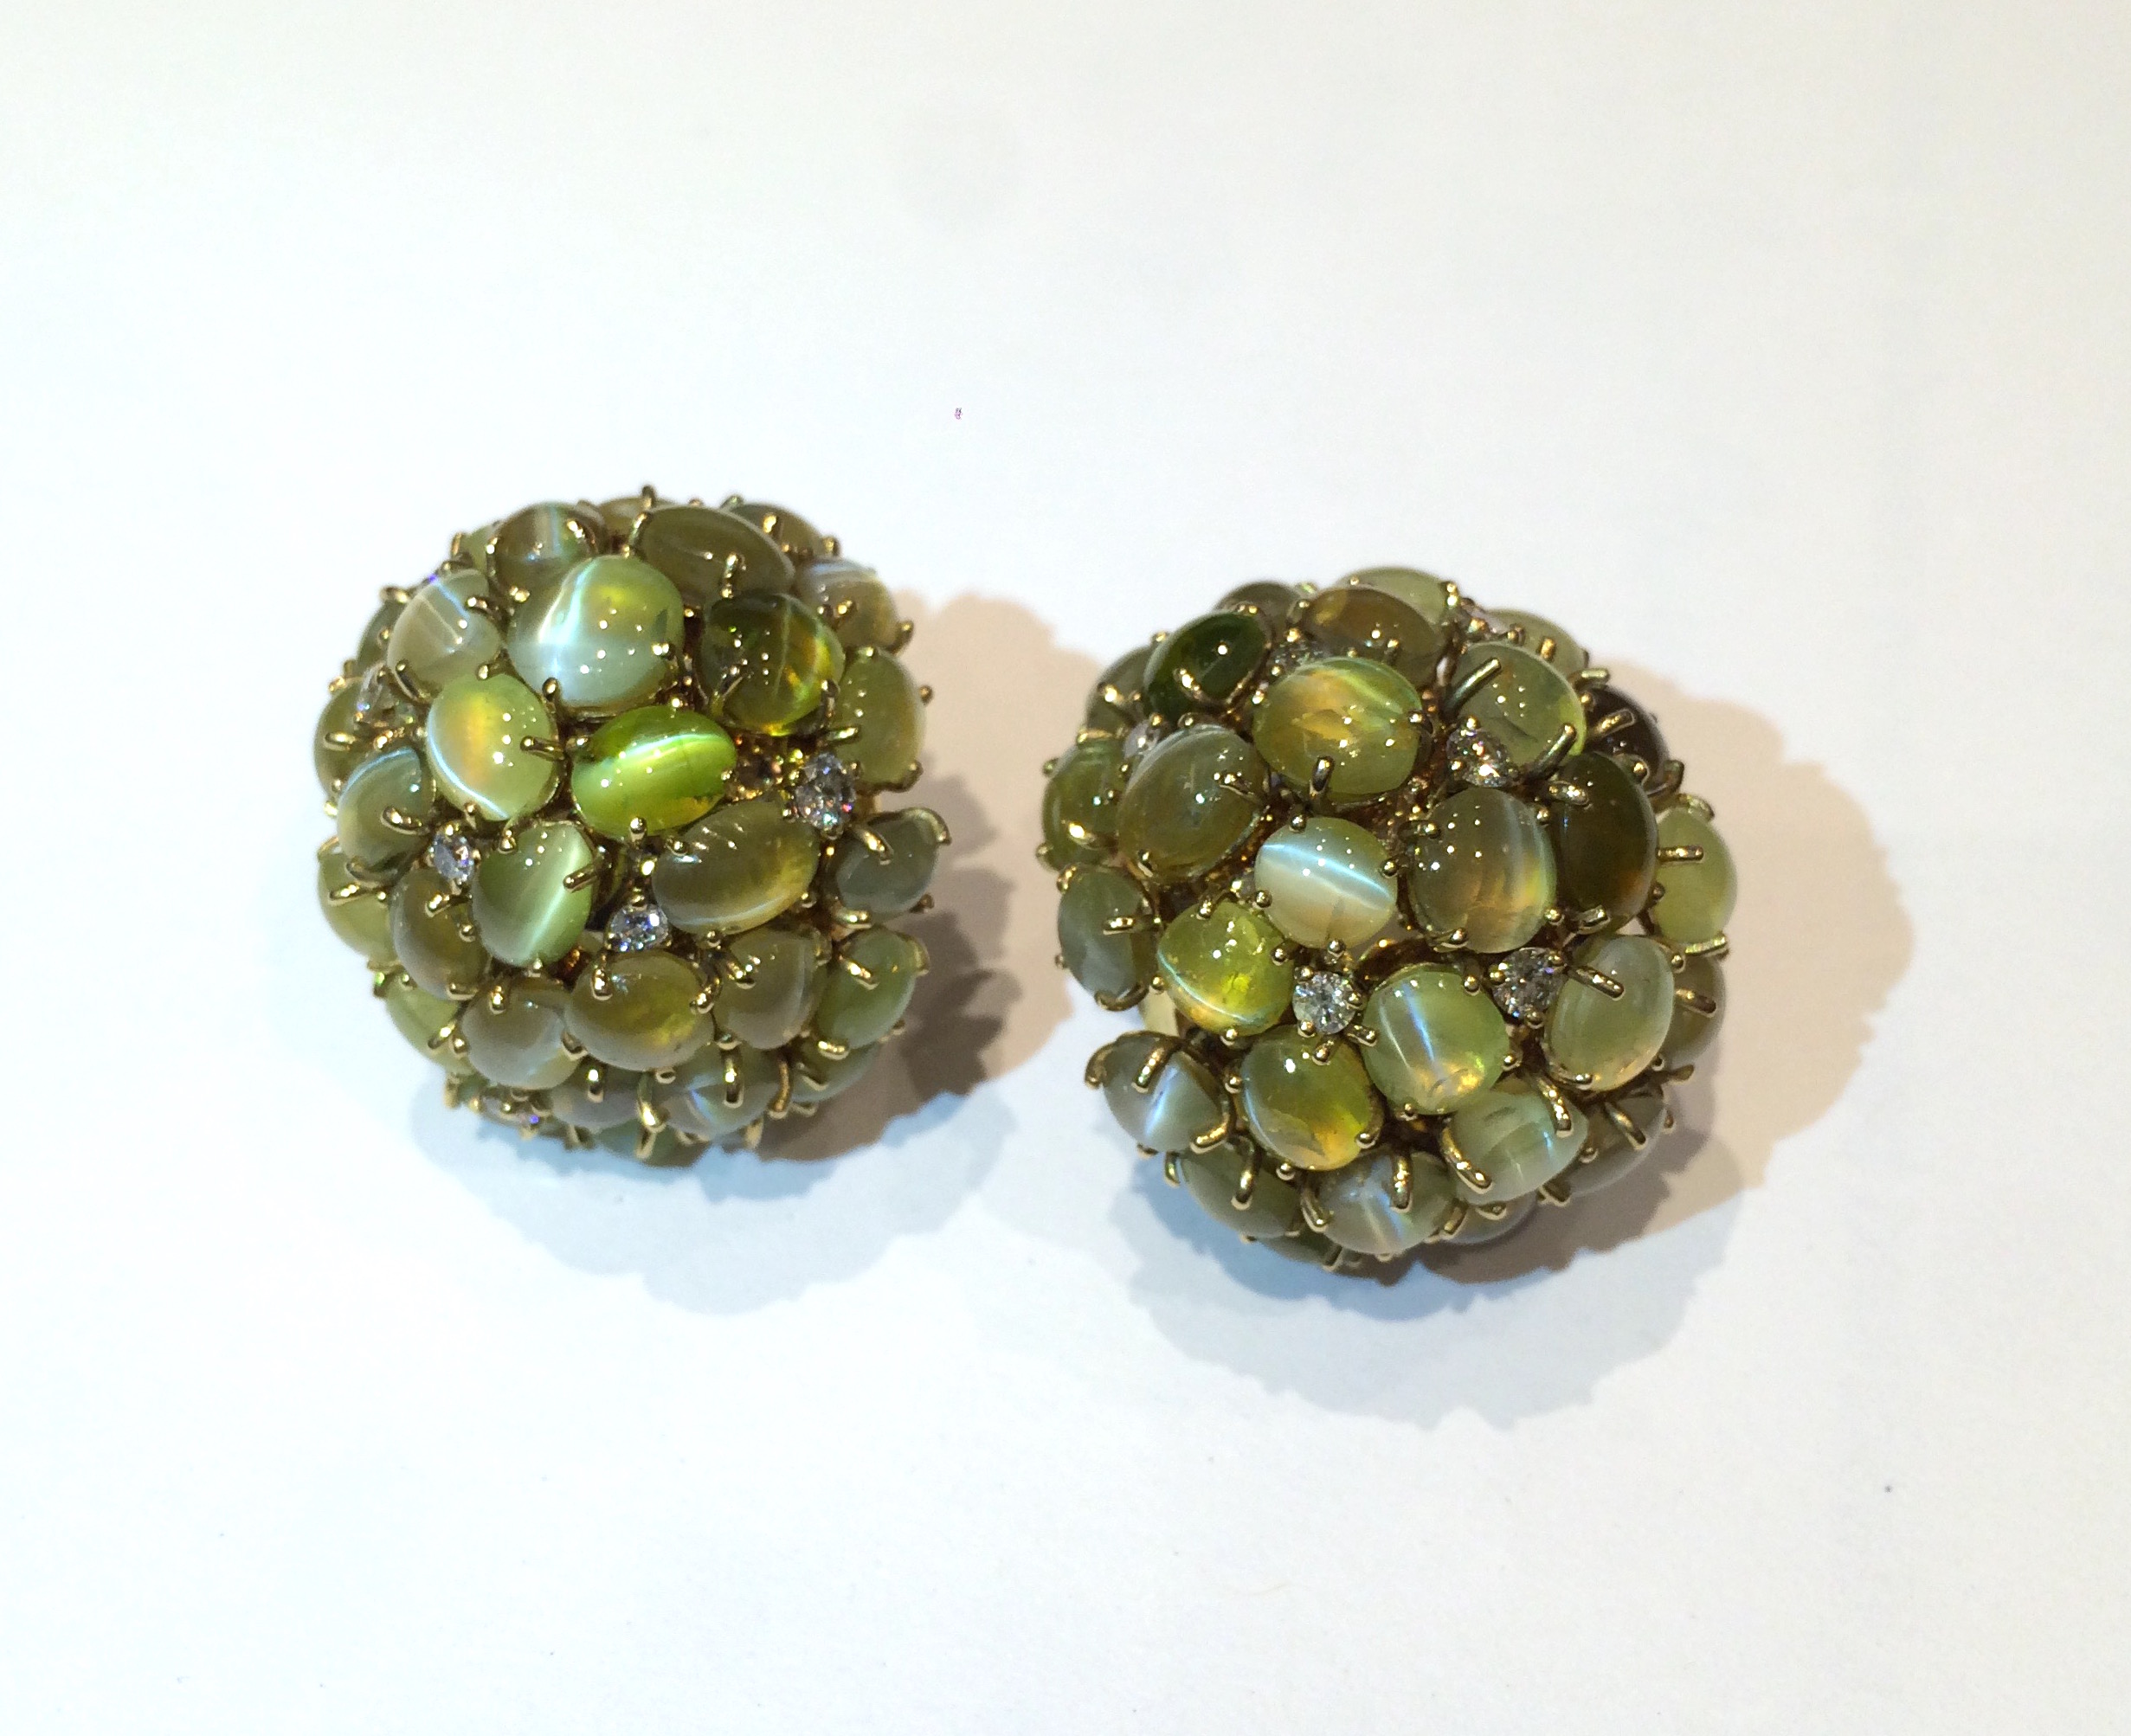 “Cat’s Eyes” bombe clip earrings, 72 fine and rare color cabochon chrysoberyl “Cat’s Eyes” and 12 interspersed diamonds, all set in 18k gold, marked, c. 1950’s